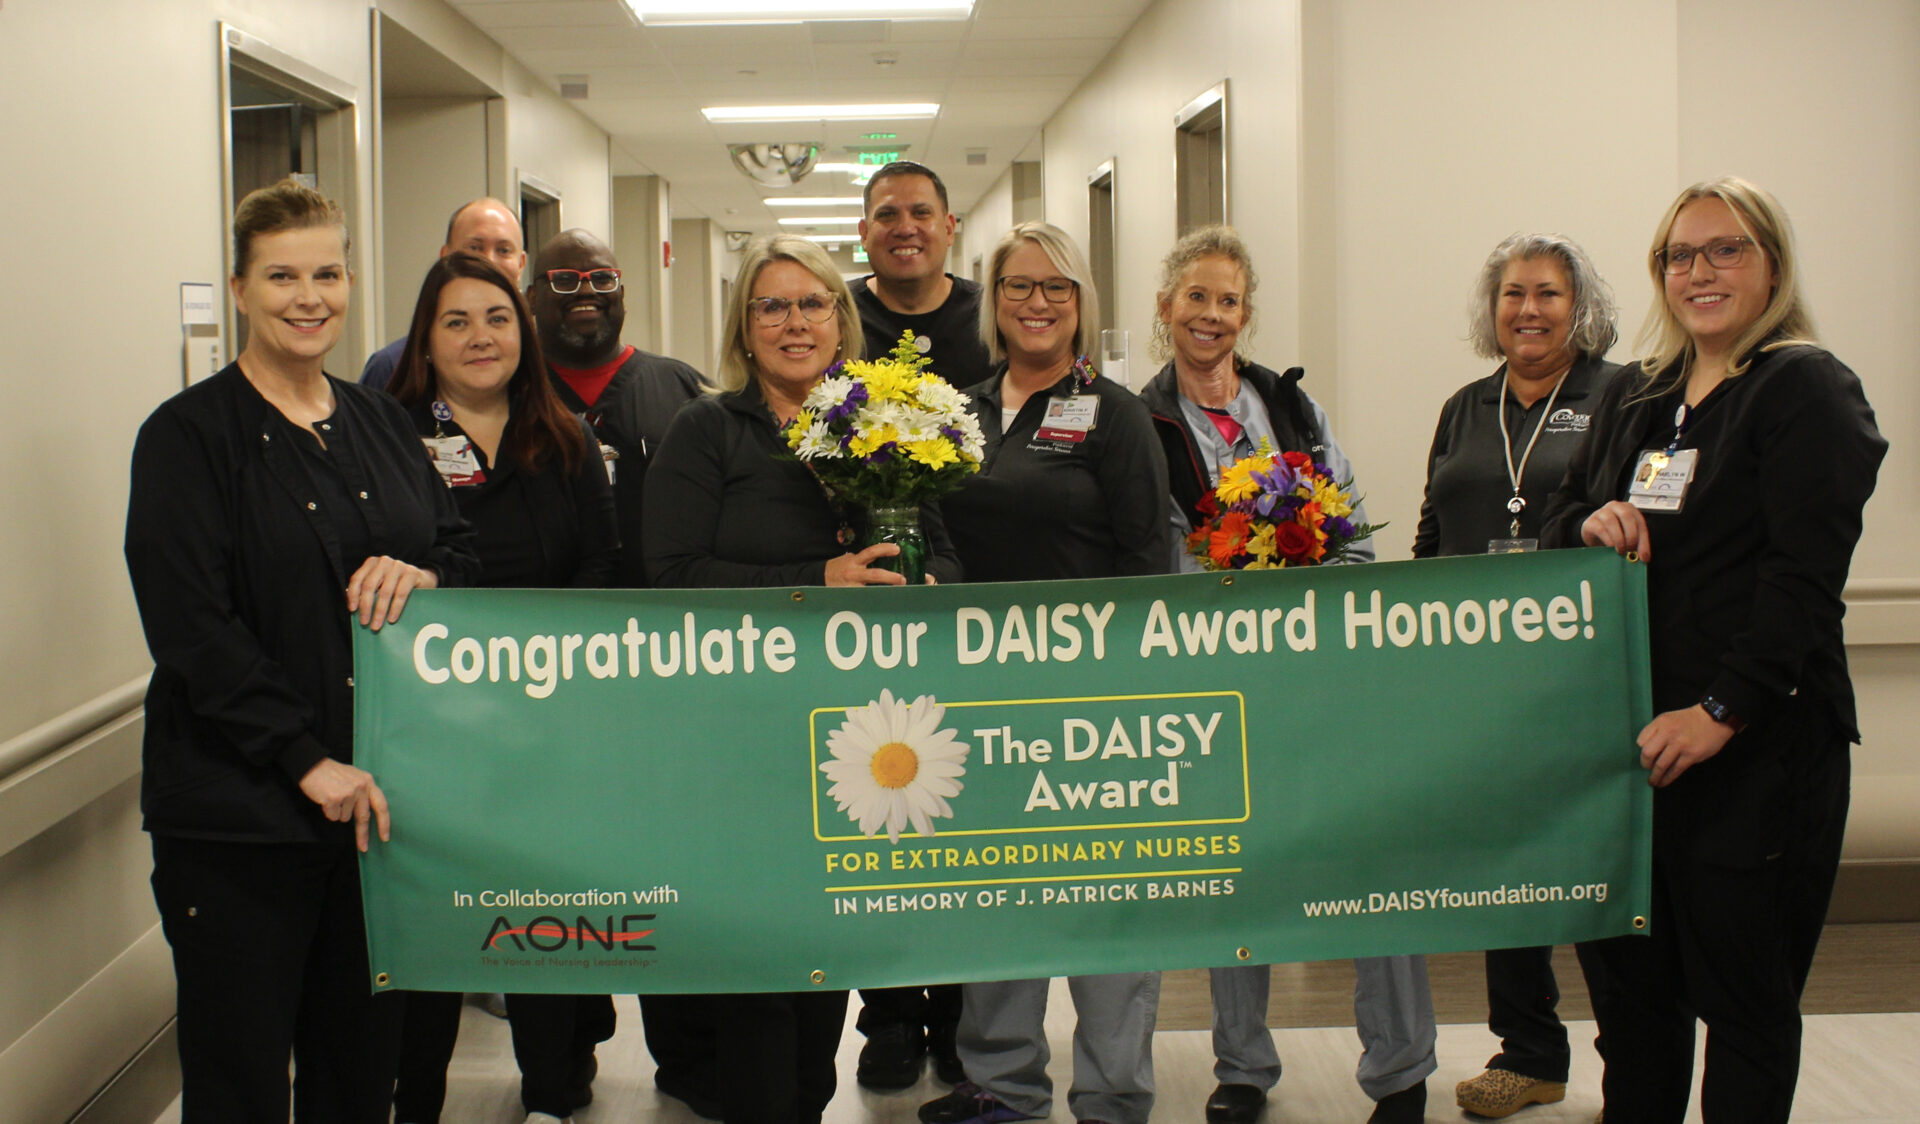 Pamela is pictured leadership team and co-workers holding DAISY banner for photo.